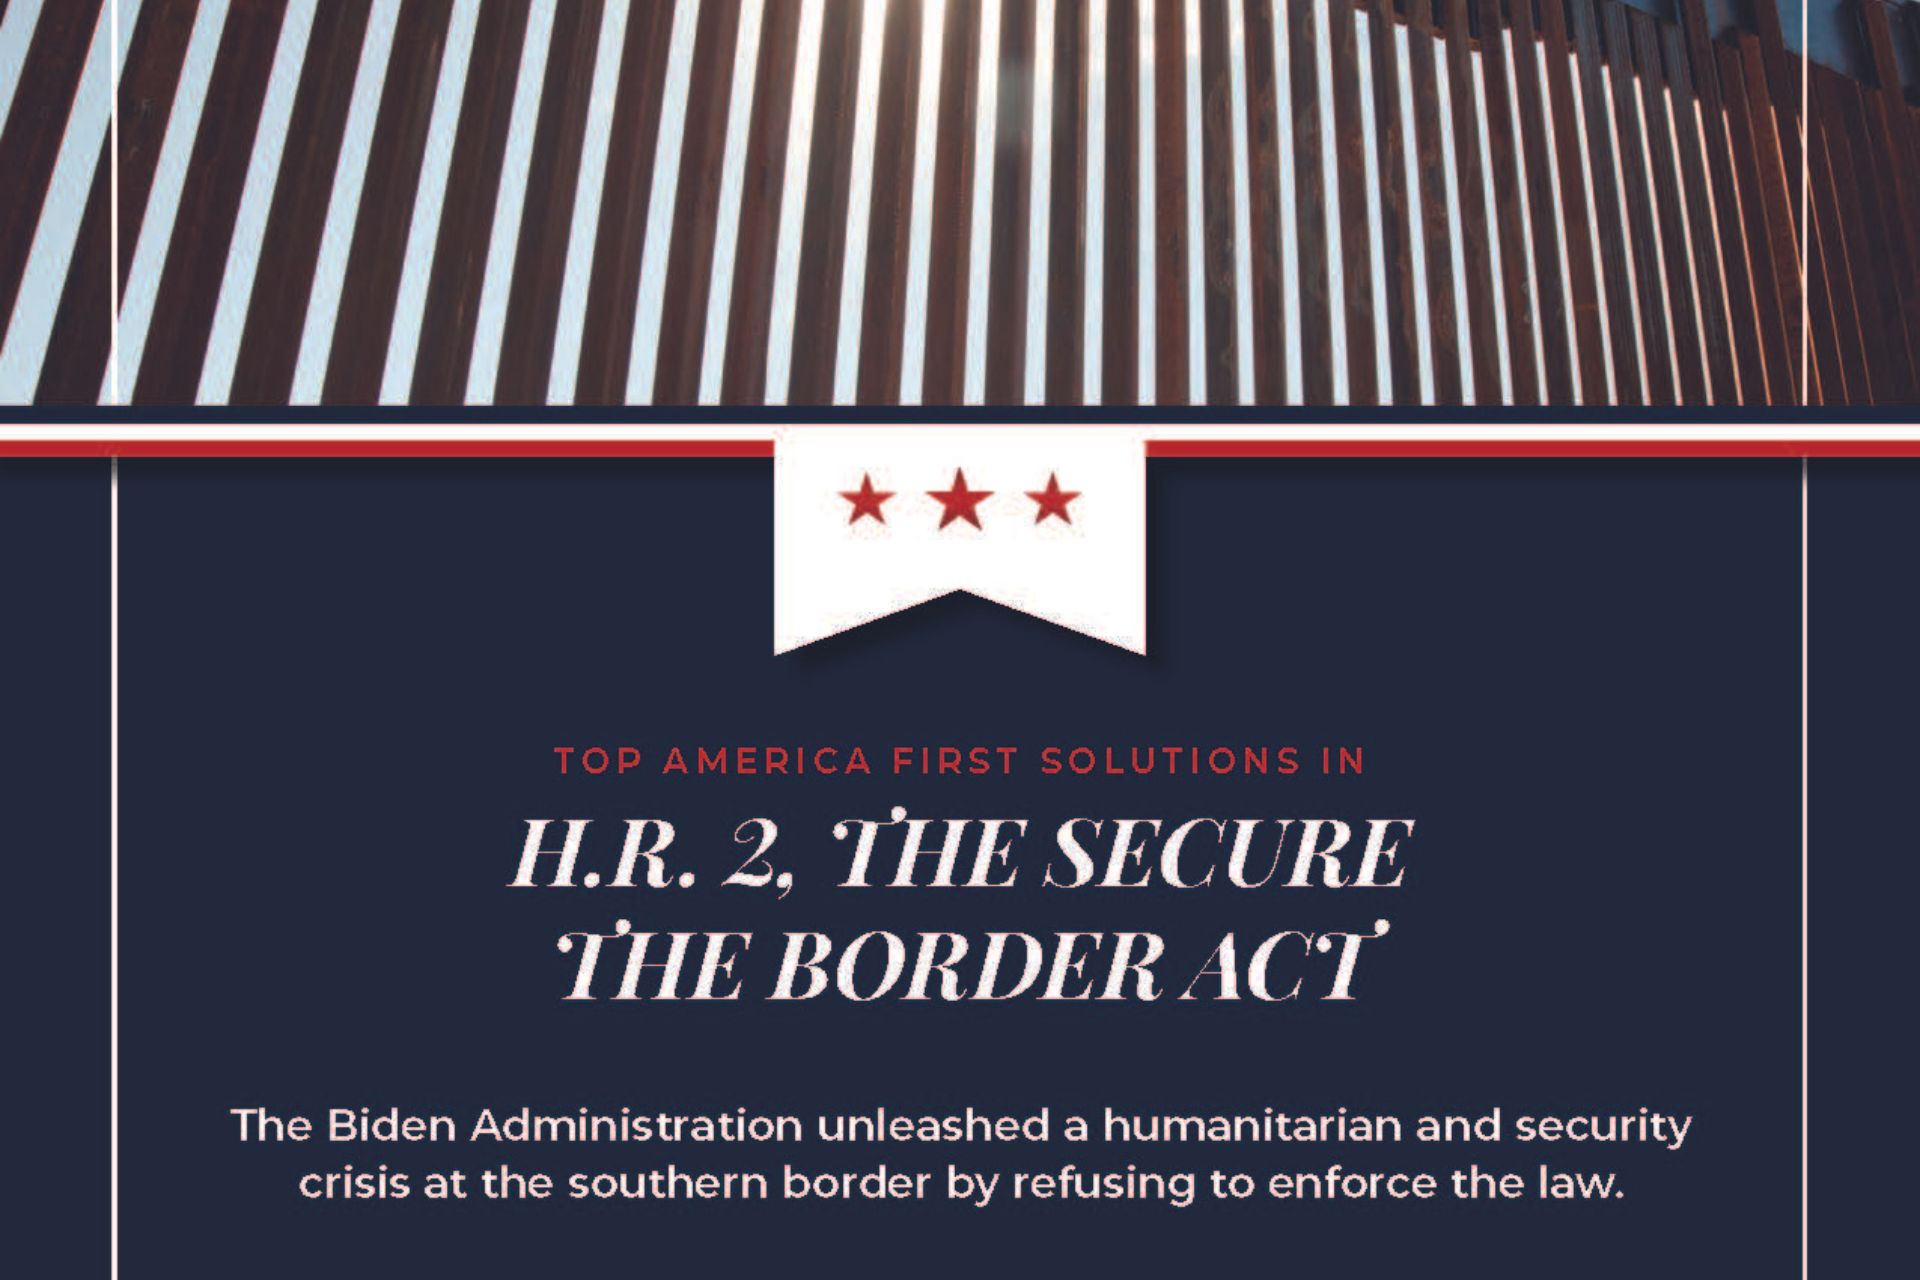 Top America First Solutions in H.R. 2, the Secure the Border Act Issues